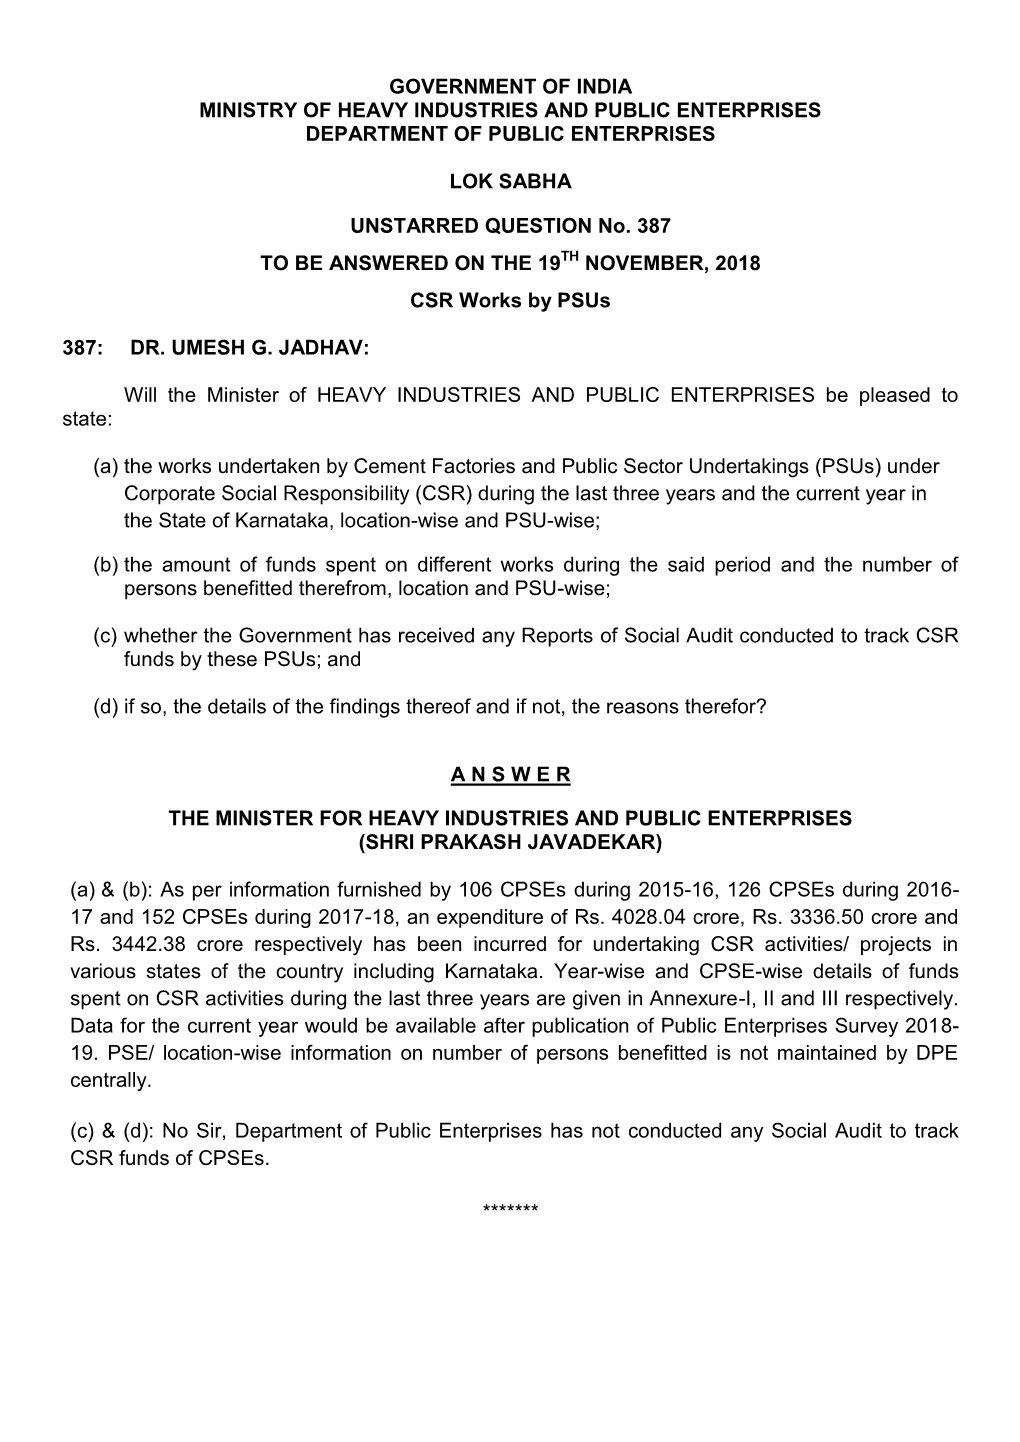 Government of India Ministry of Heavy Industries and Public Enterprises Department of Public Enterprises